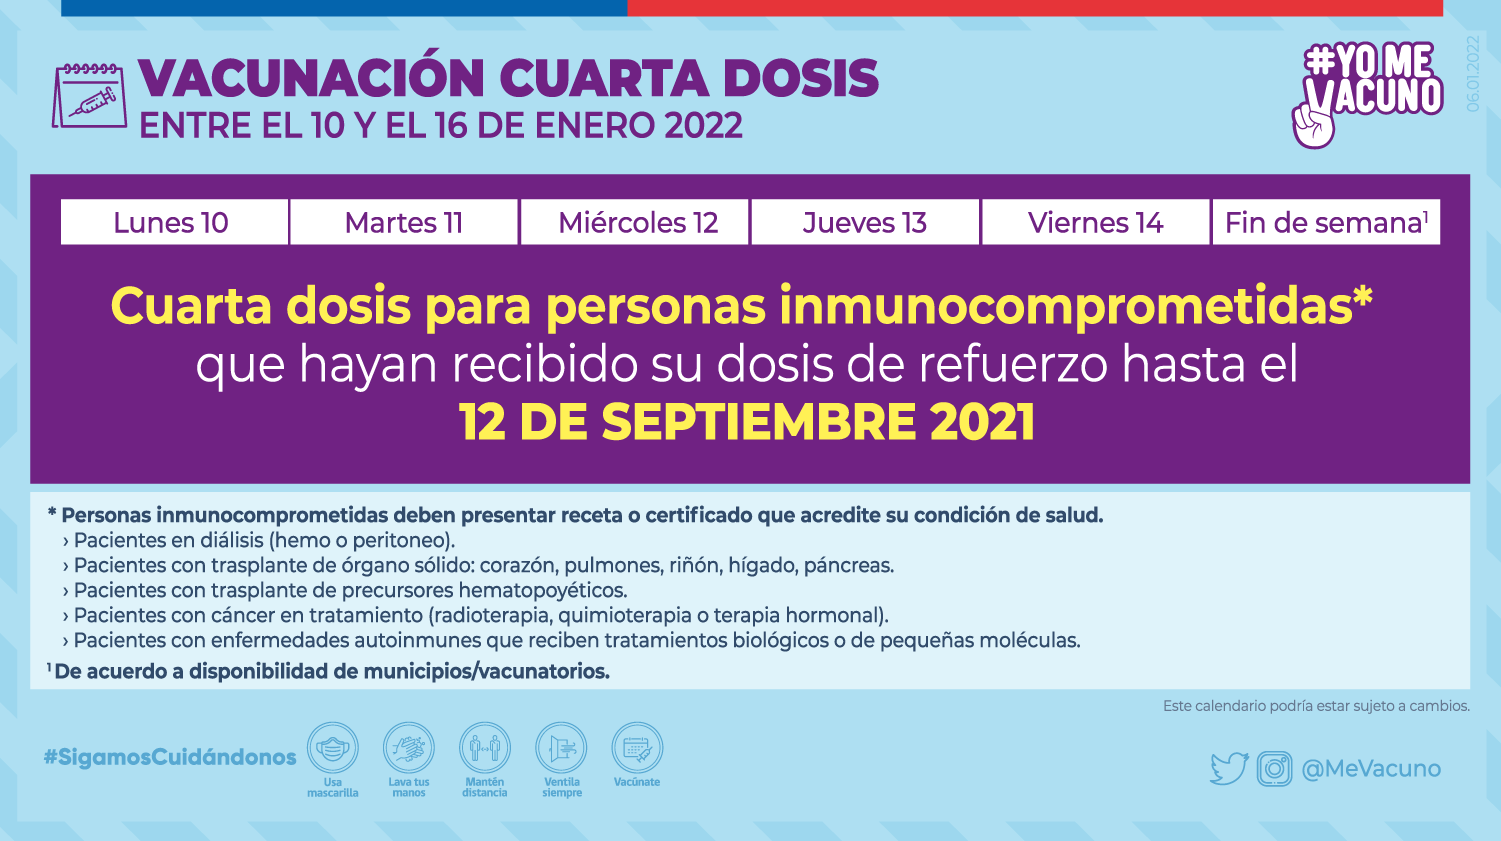 Fourth dose vaccination against Covid-19 begins for immunocompromised individuals